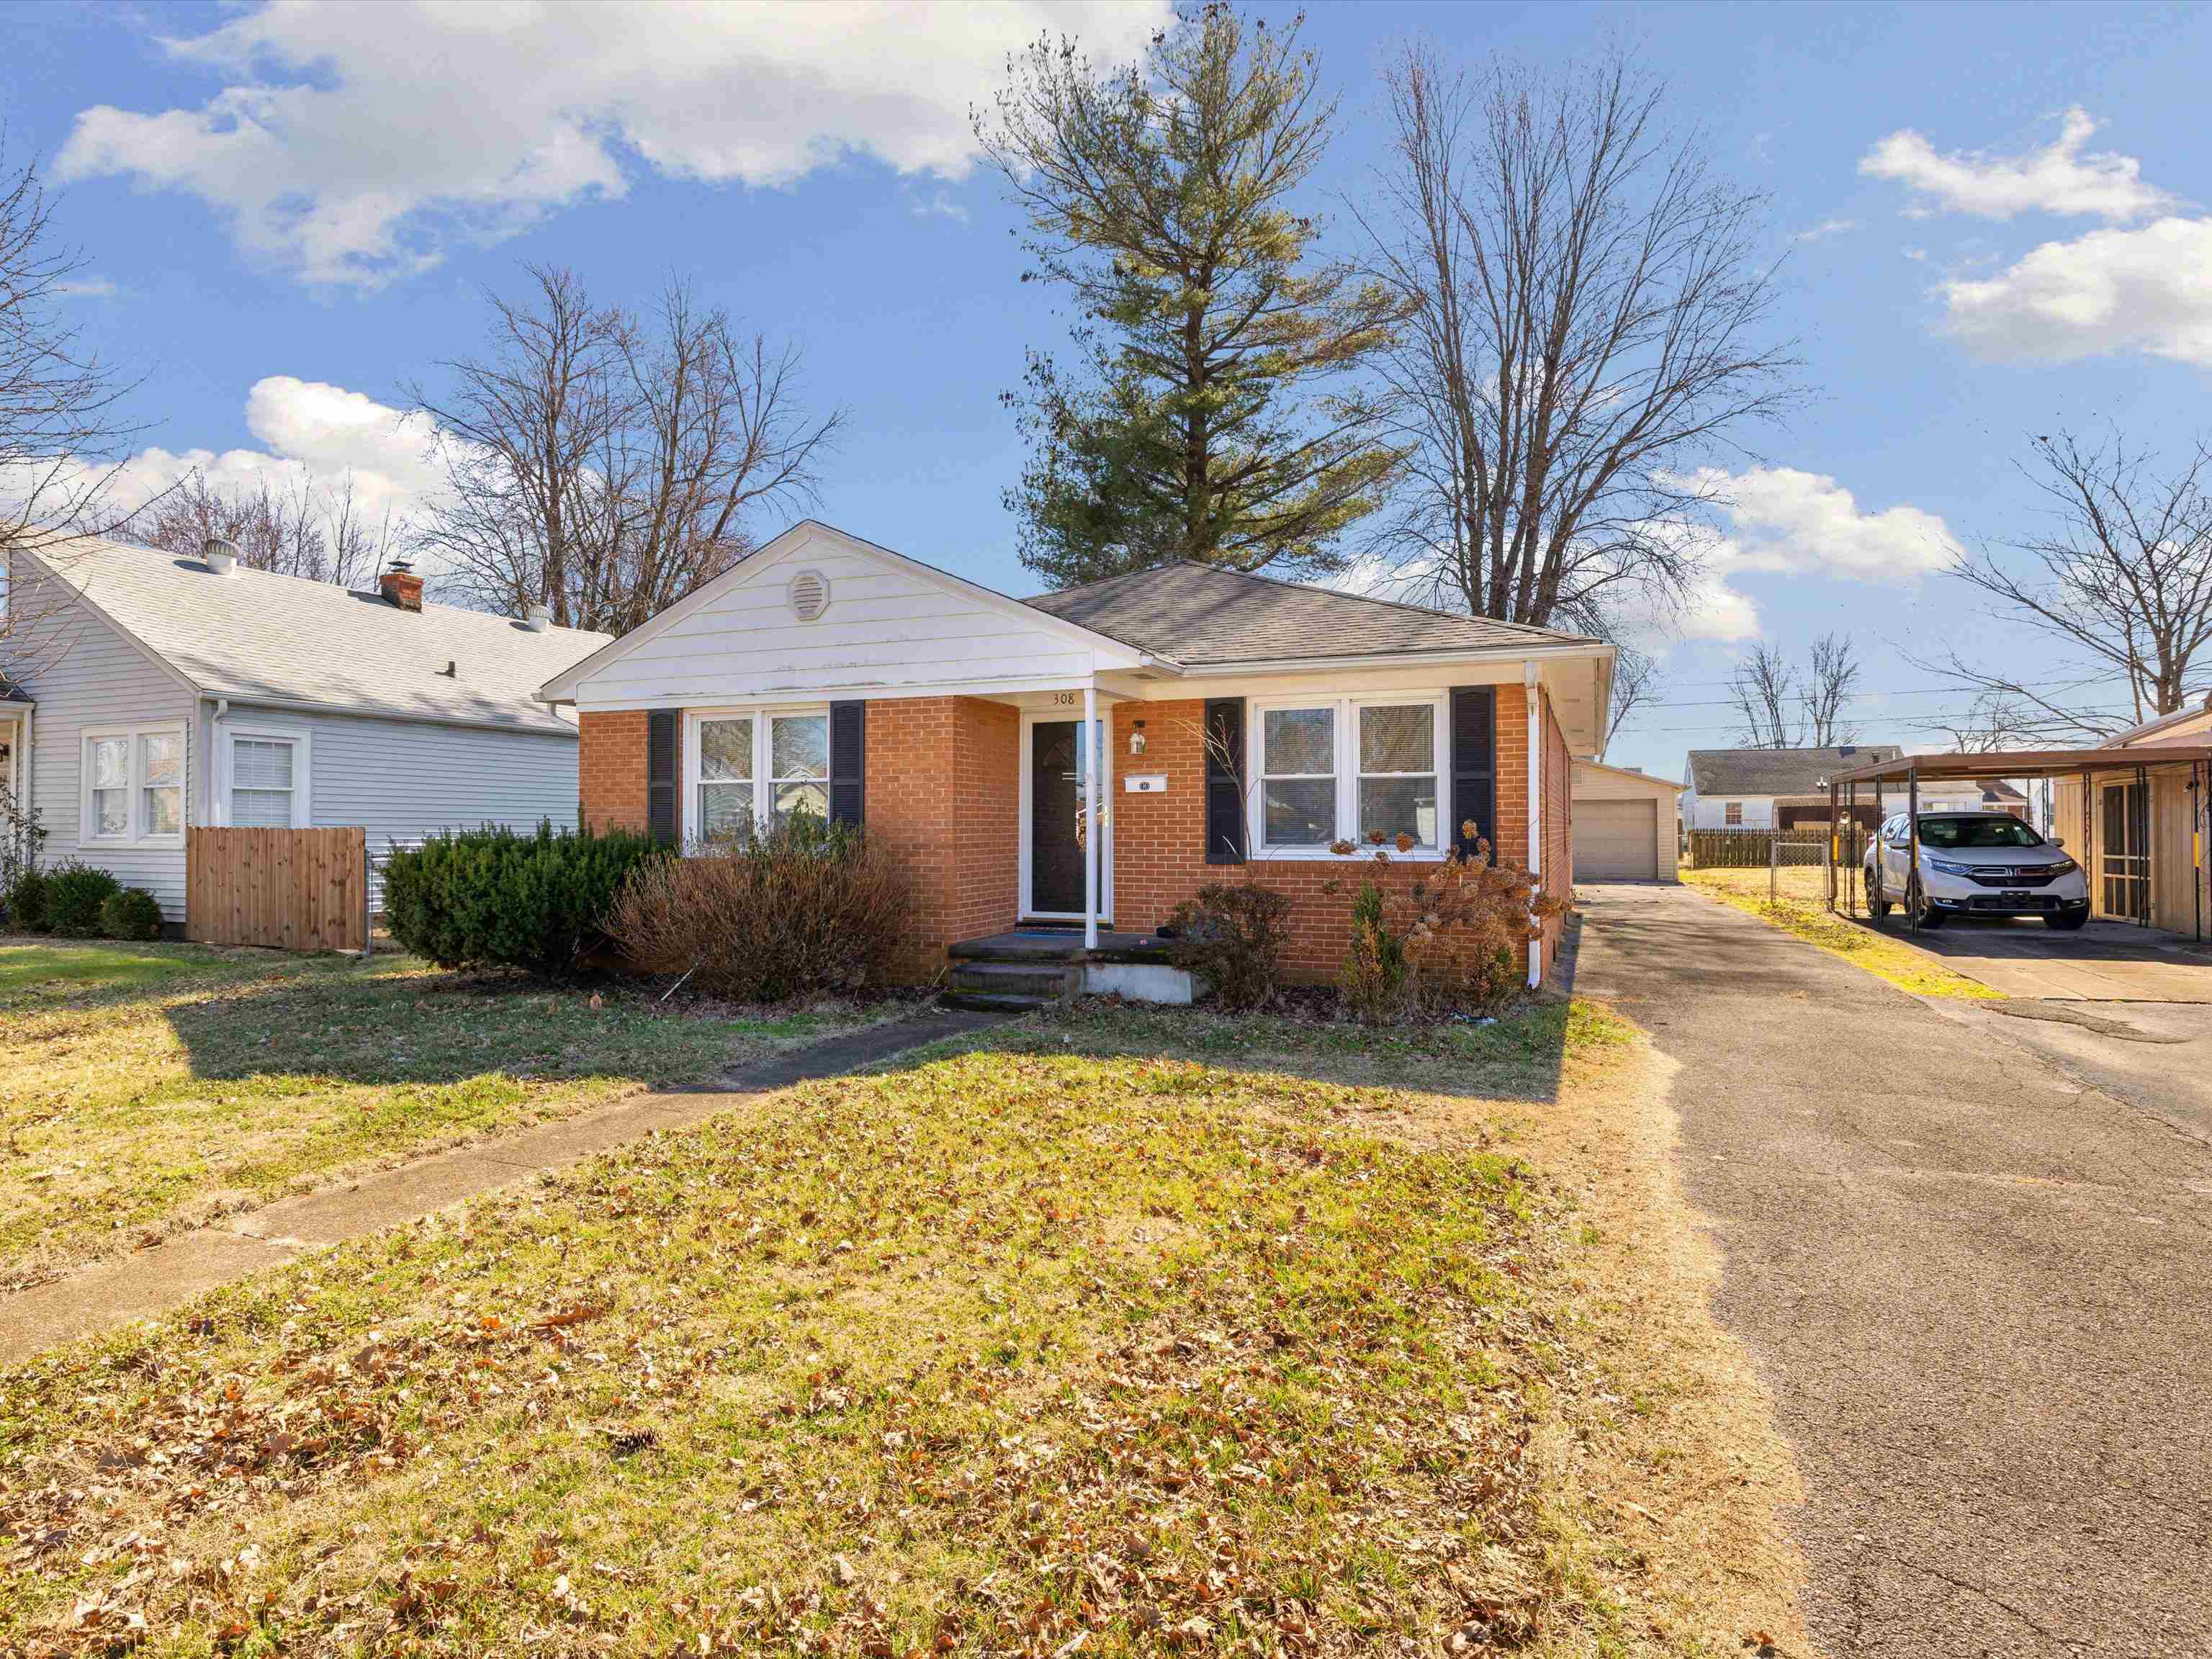 308 E 22nd, Owensboro, Kentucky 42303, 3 Bedrooms Bedrooms, ,1 BathroomBathrooms,Single Family Residence,For Sale,E 22nd,89033